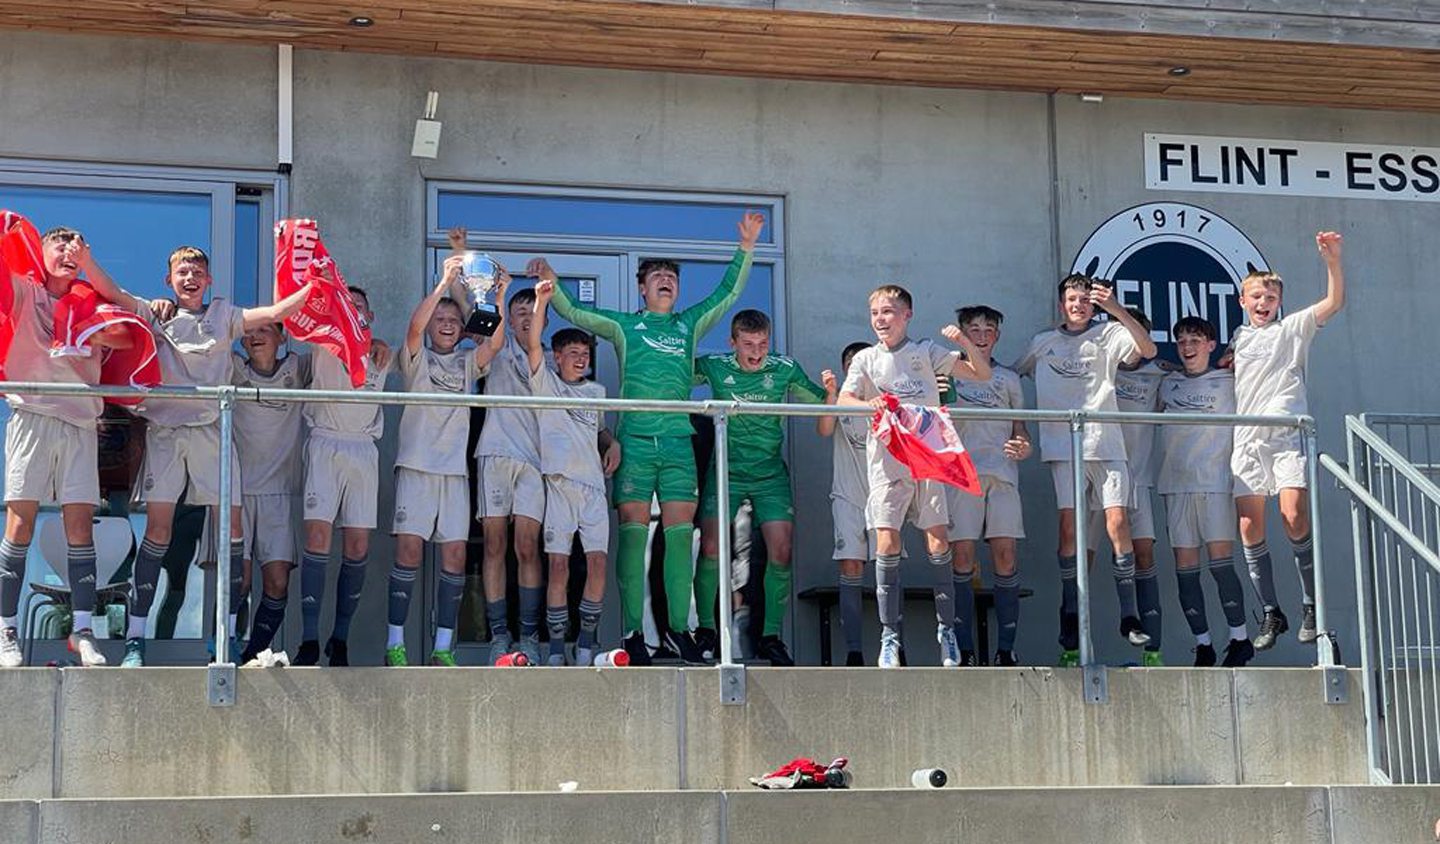 Aberdeen 2008/09's squad celebrate winning the Flint Micasa Cup in Norway.